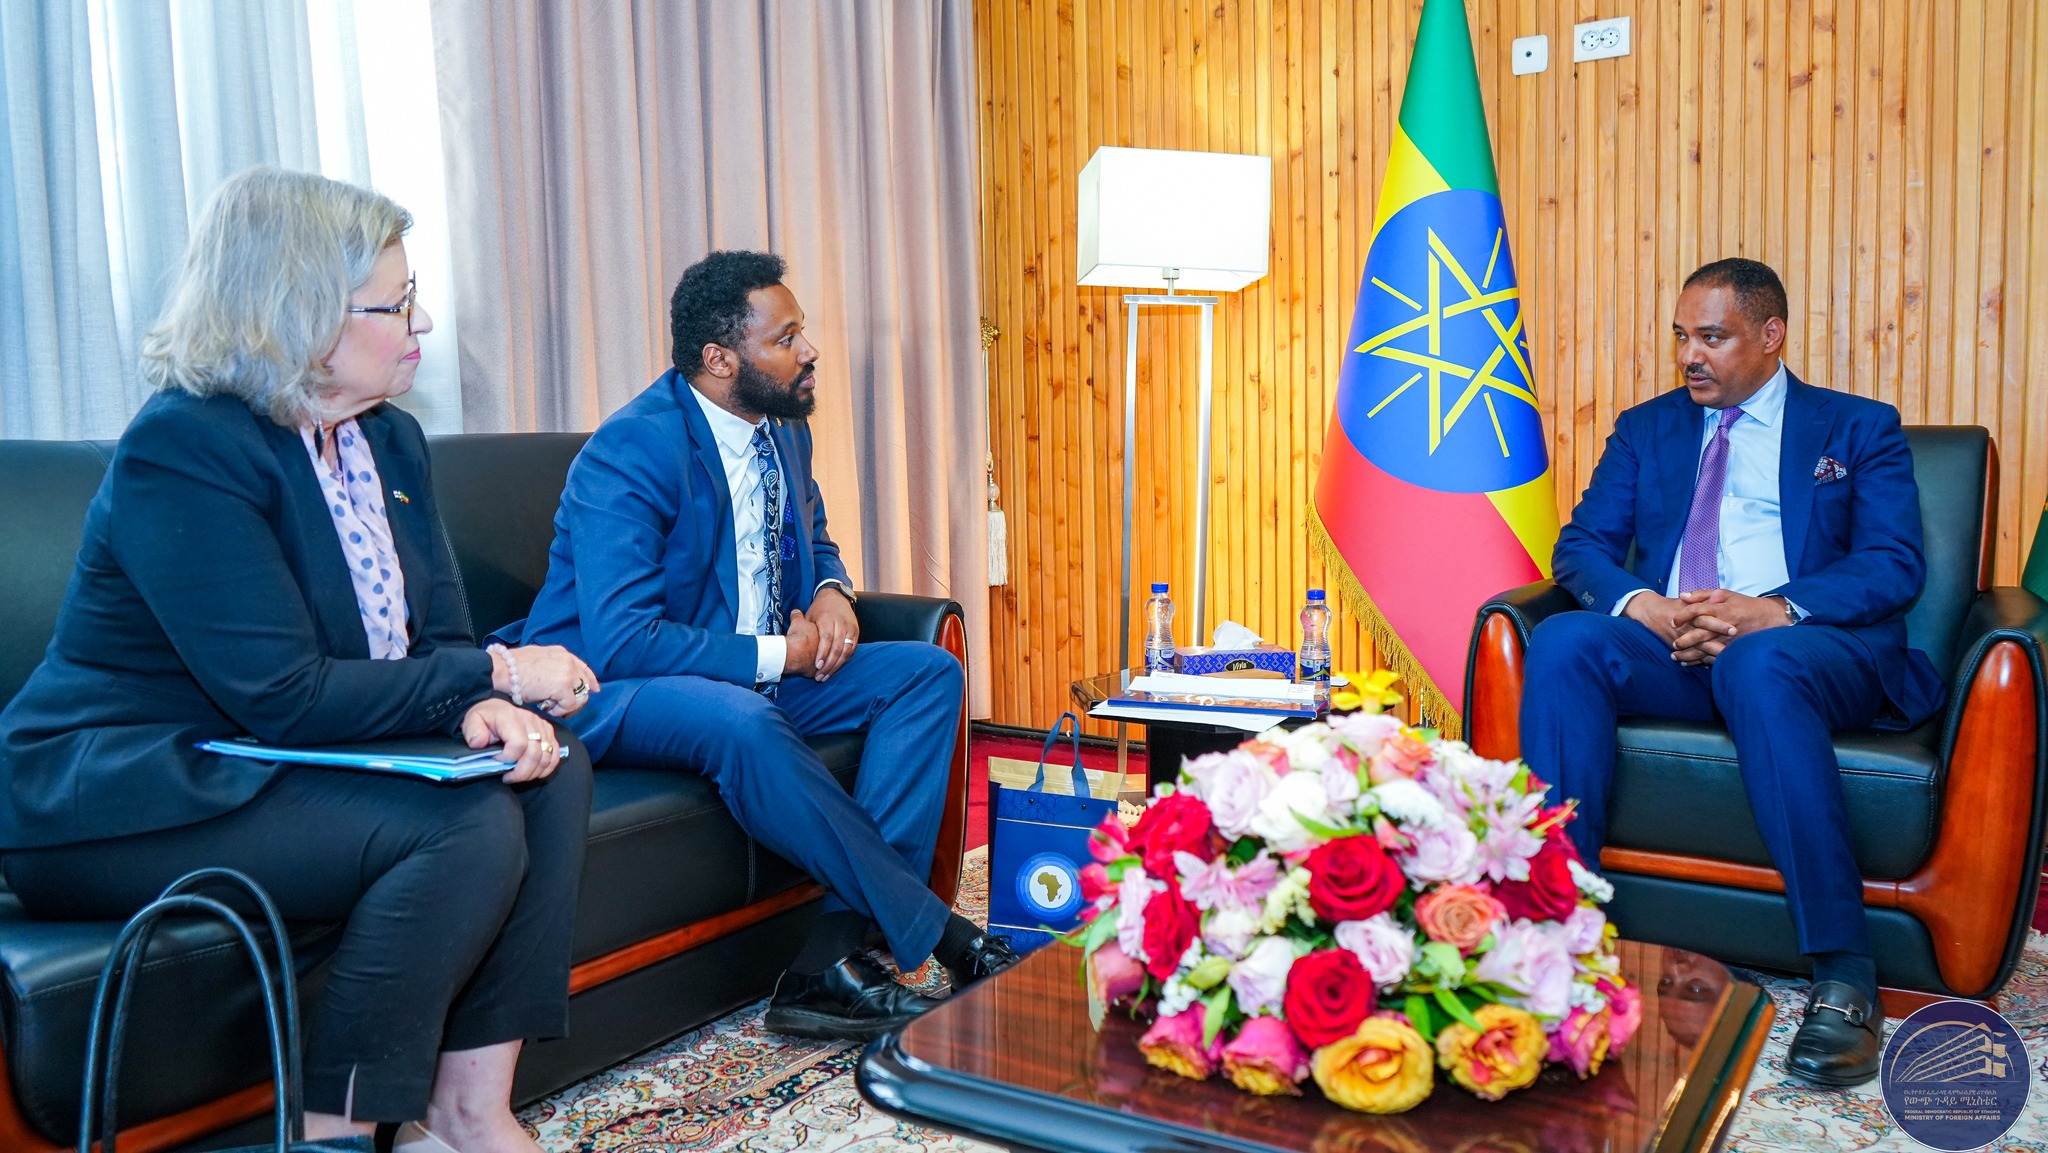 Finland Says It Commits to Supporting Ethiopia's National Dialogue